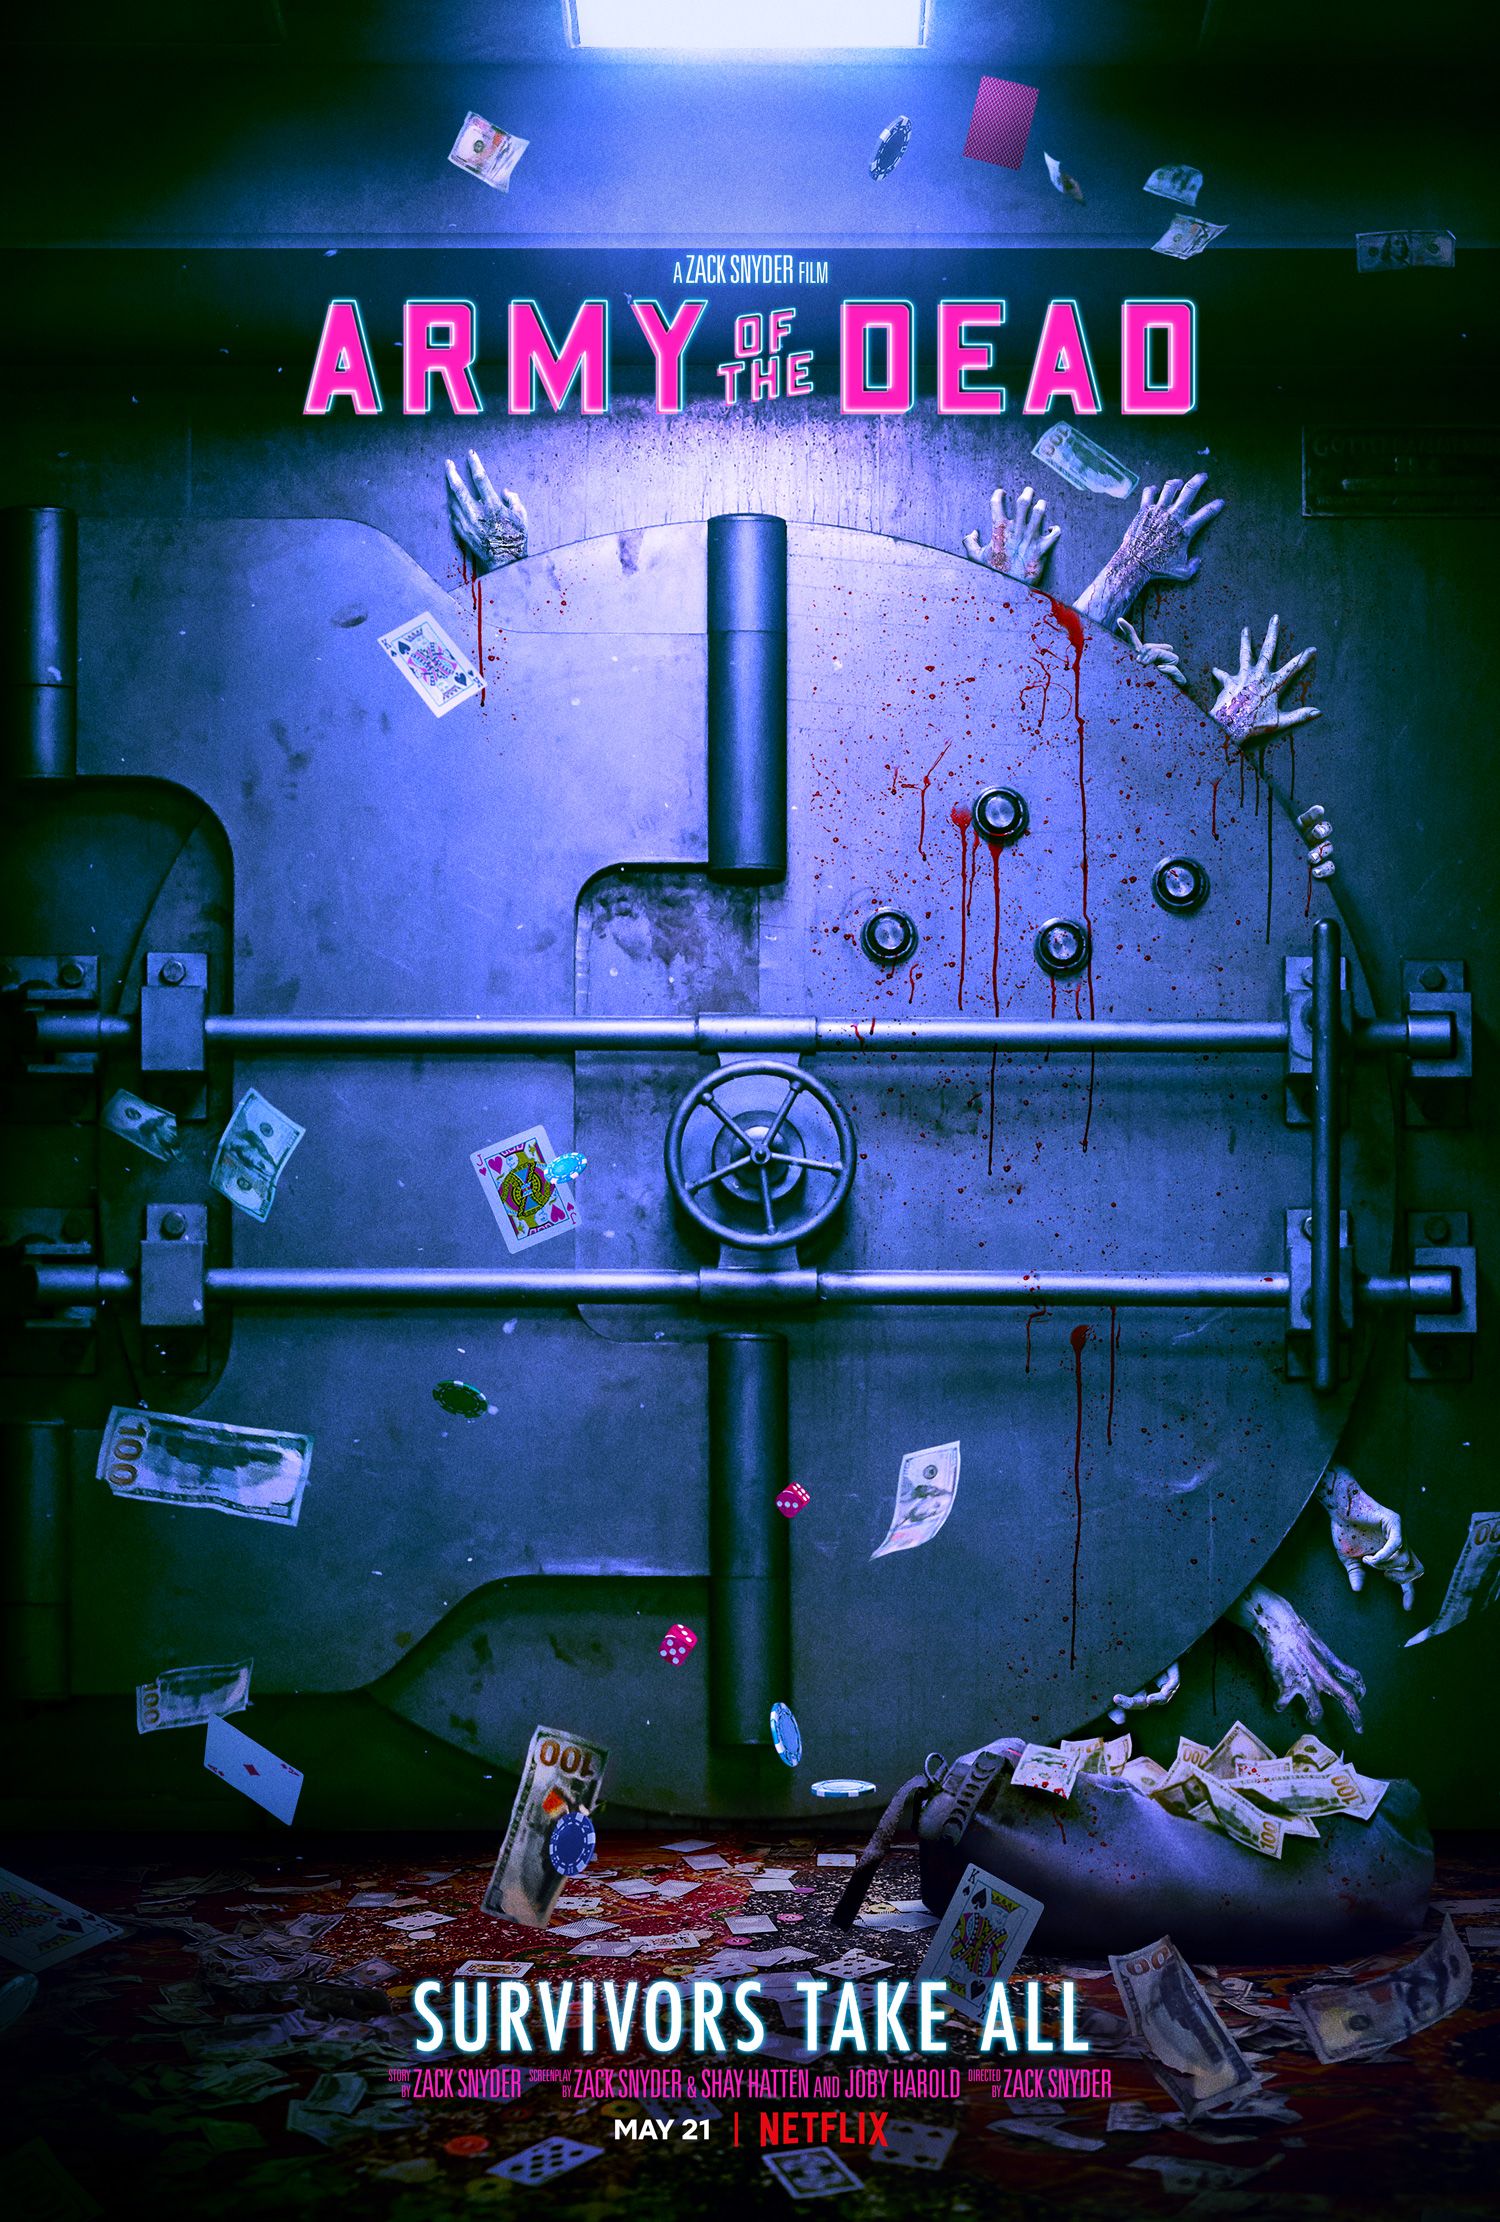 Zack Snyder Army of the Dead poster official